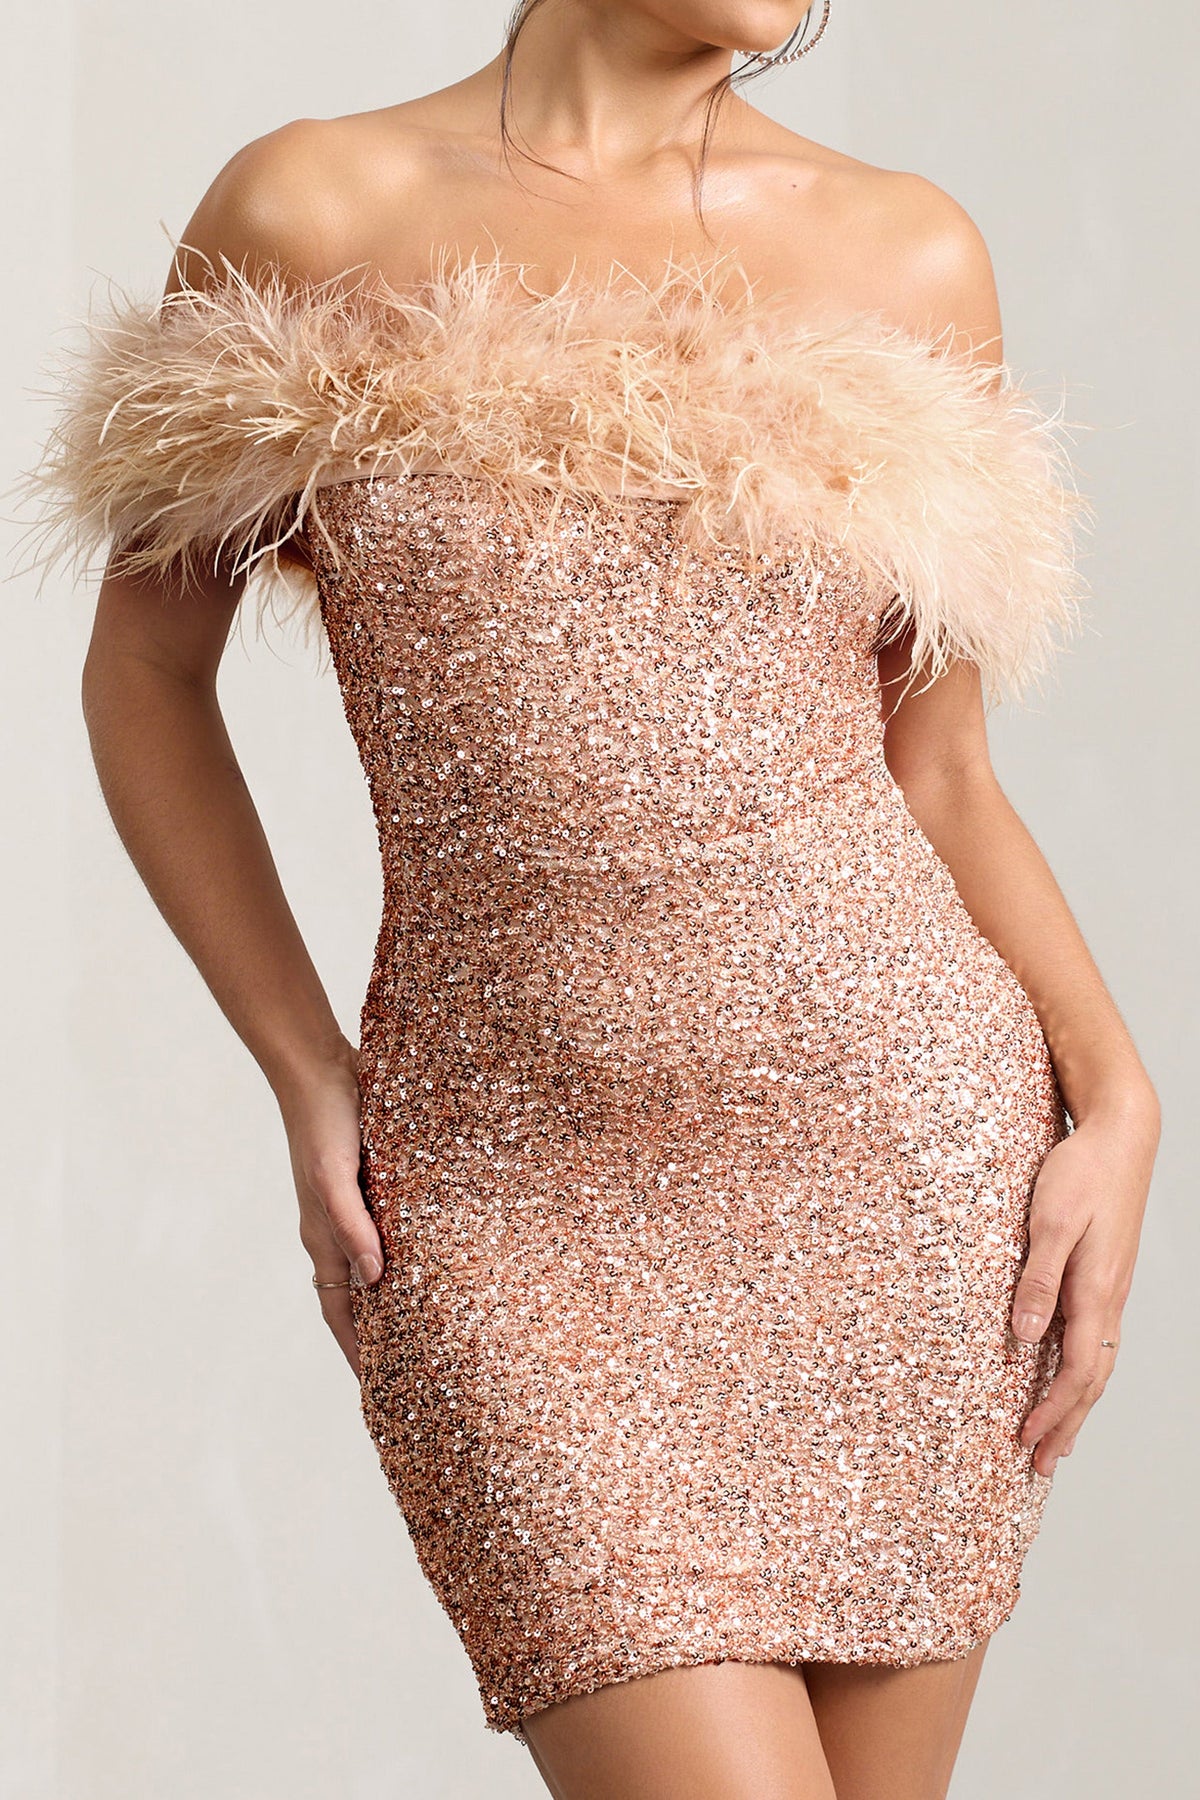 New Money Gold Bodycon Sequin Mini Dress With Feather Trim – Club L London  - USA